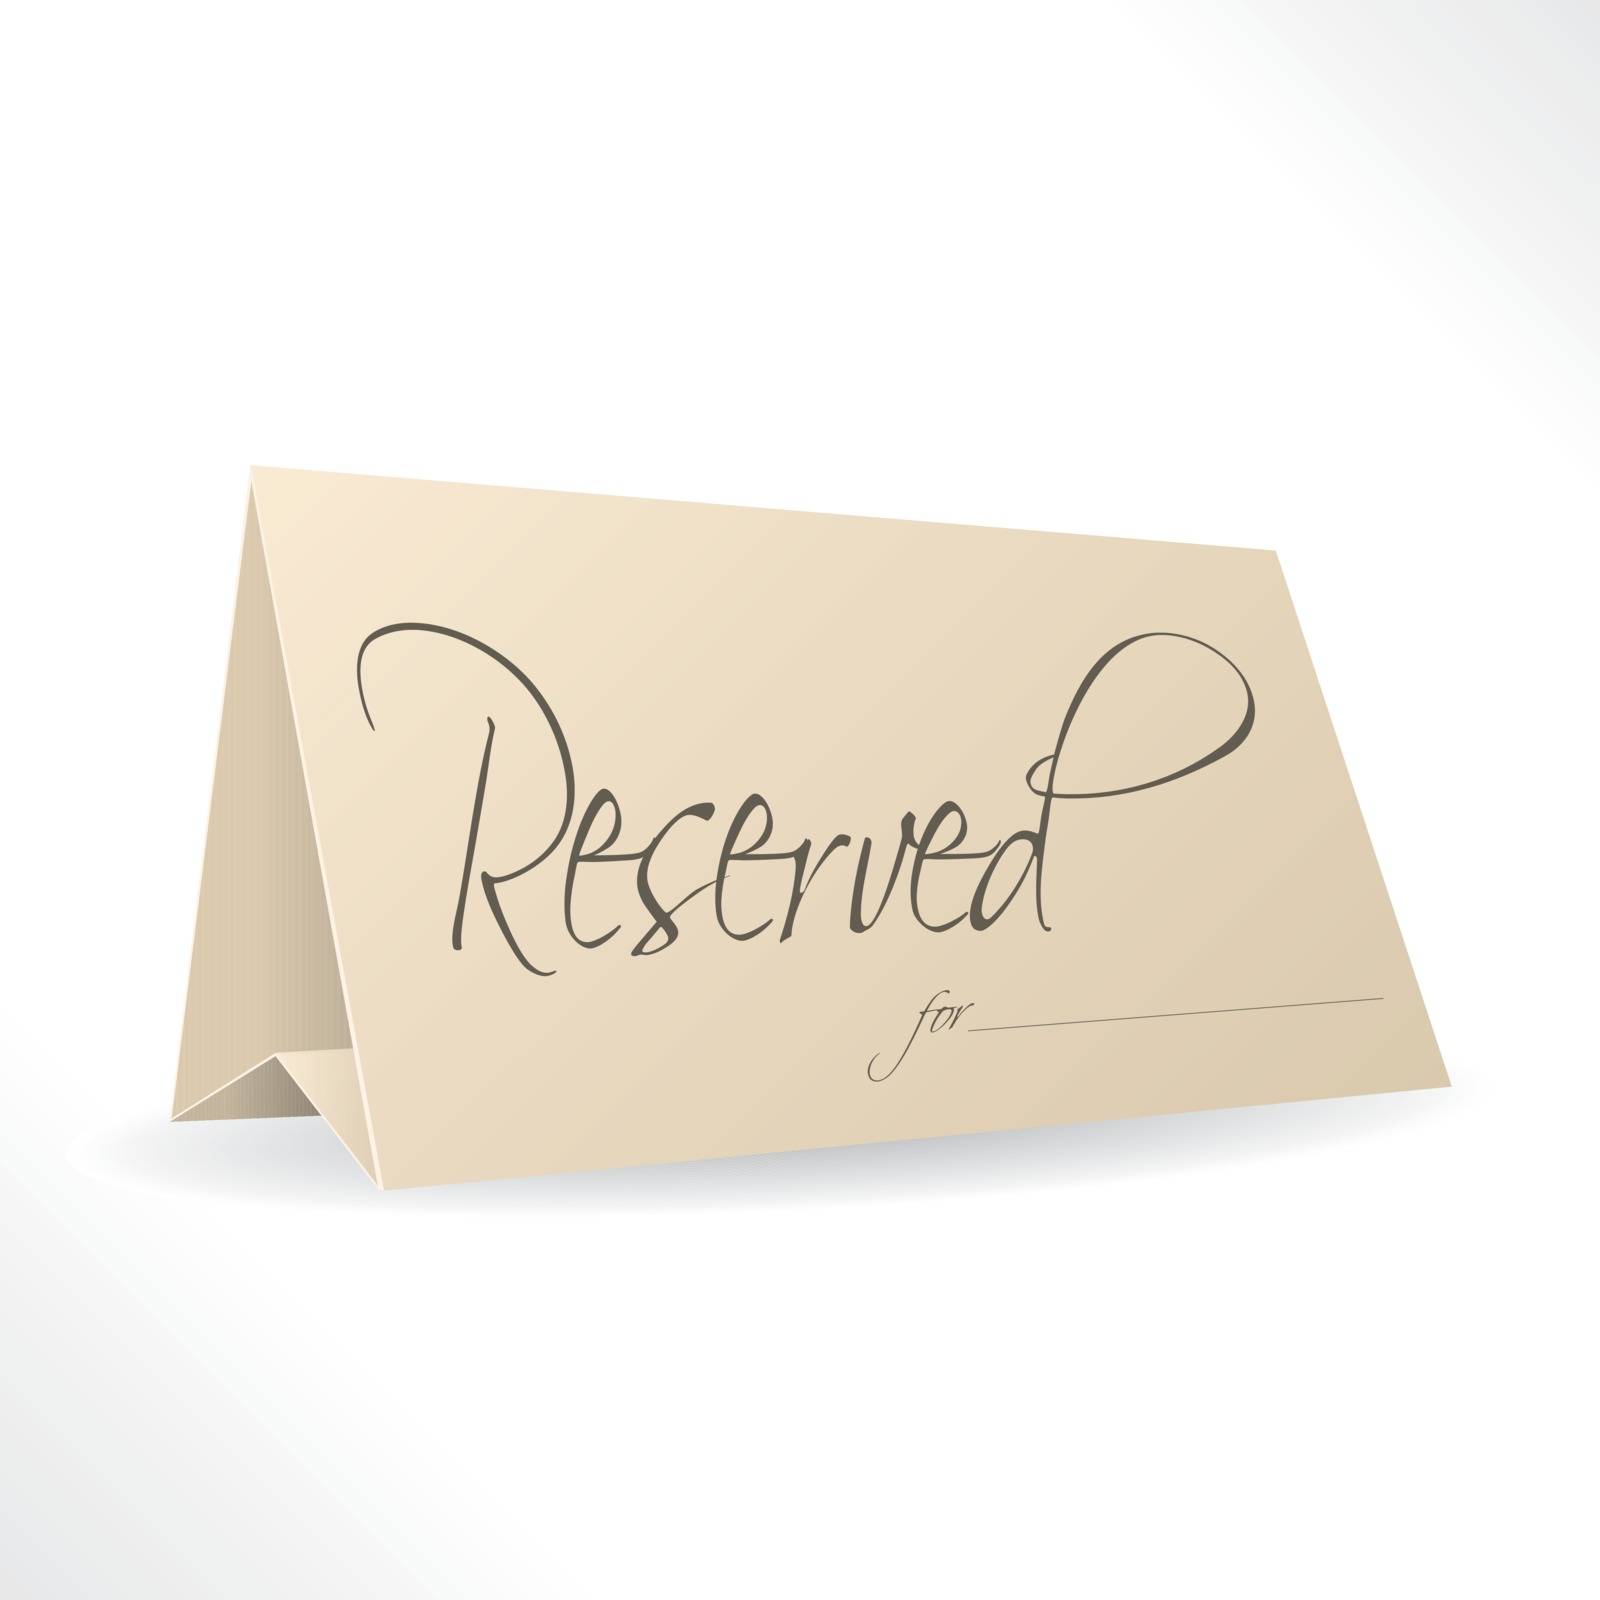 Reserved note with place for name  by vipervxw